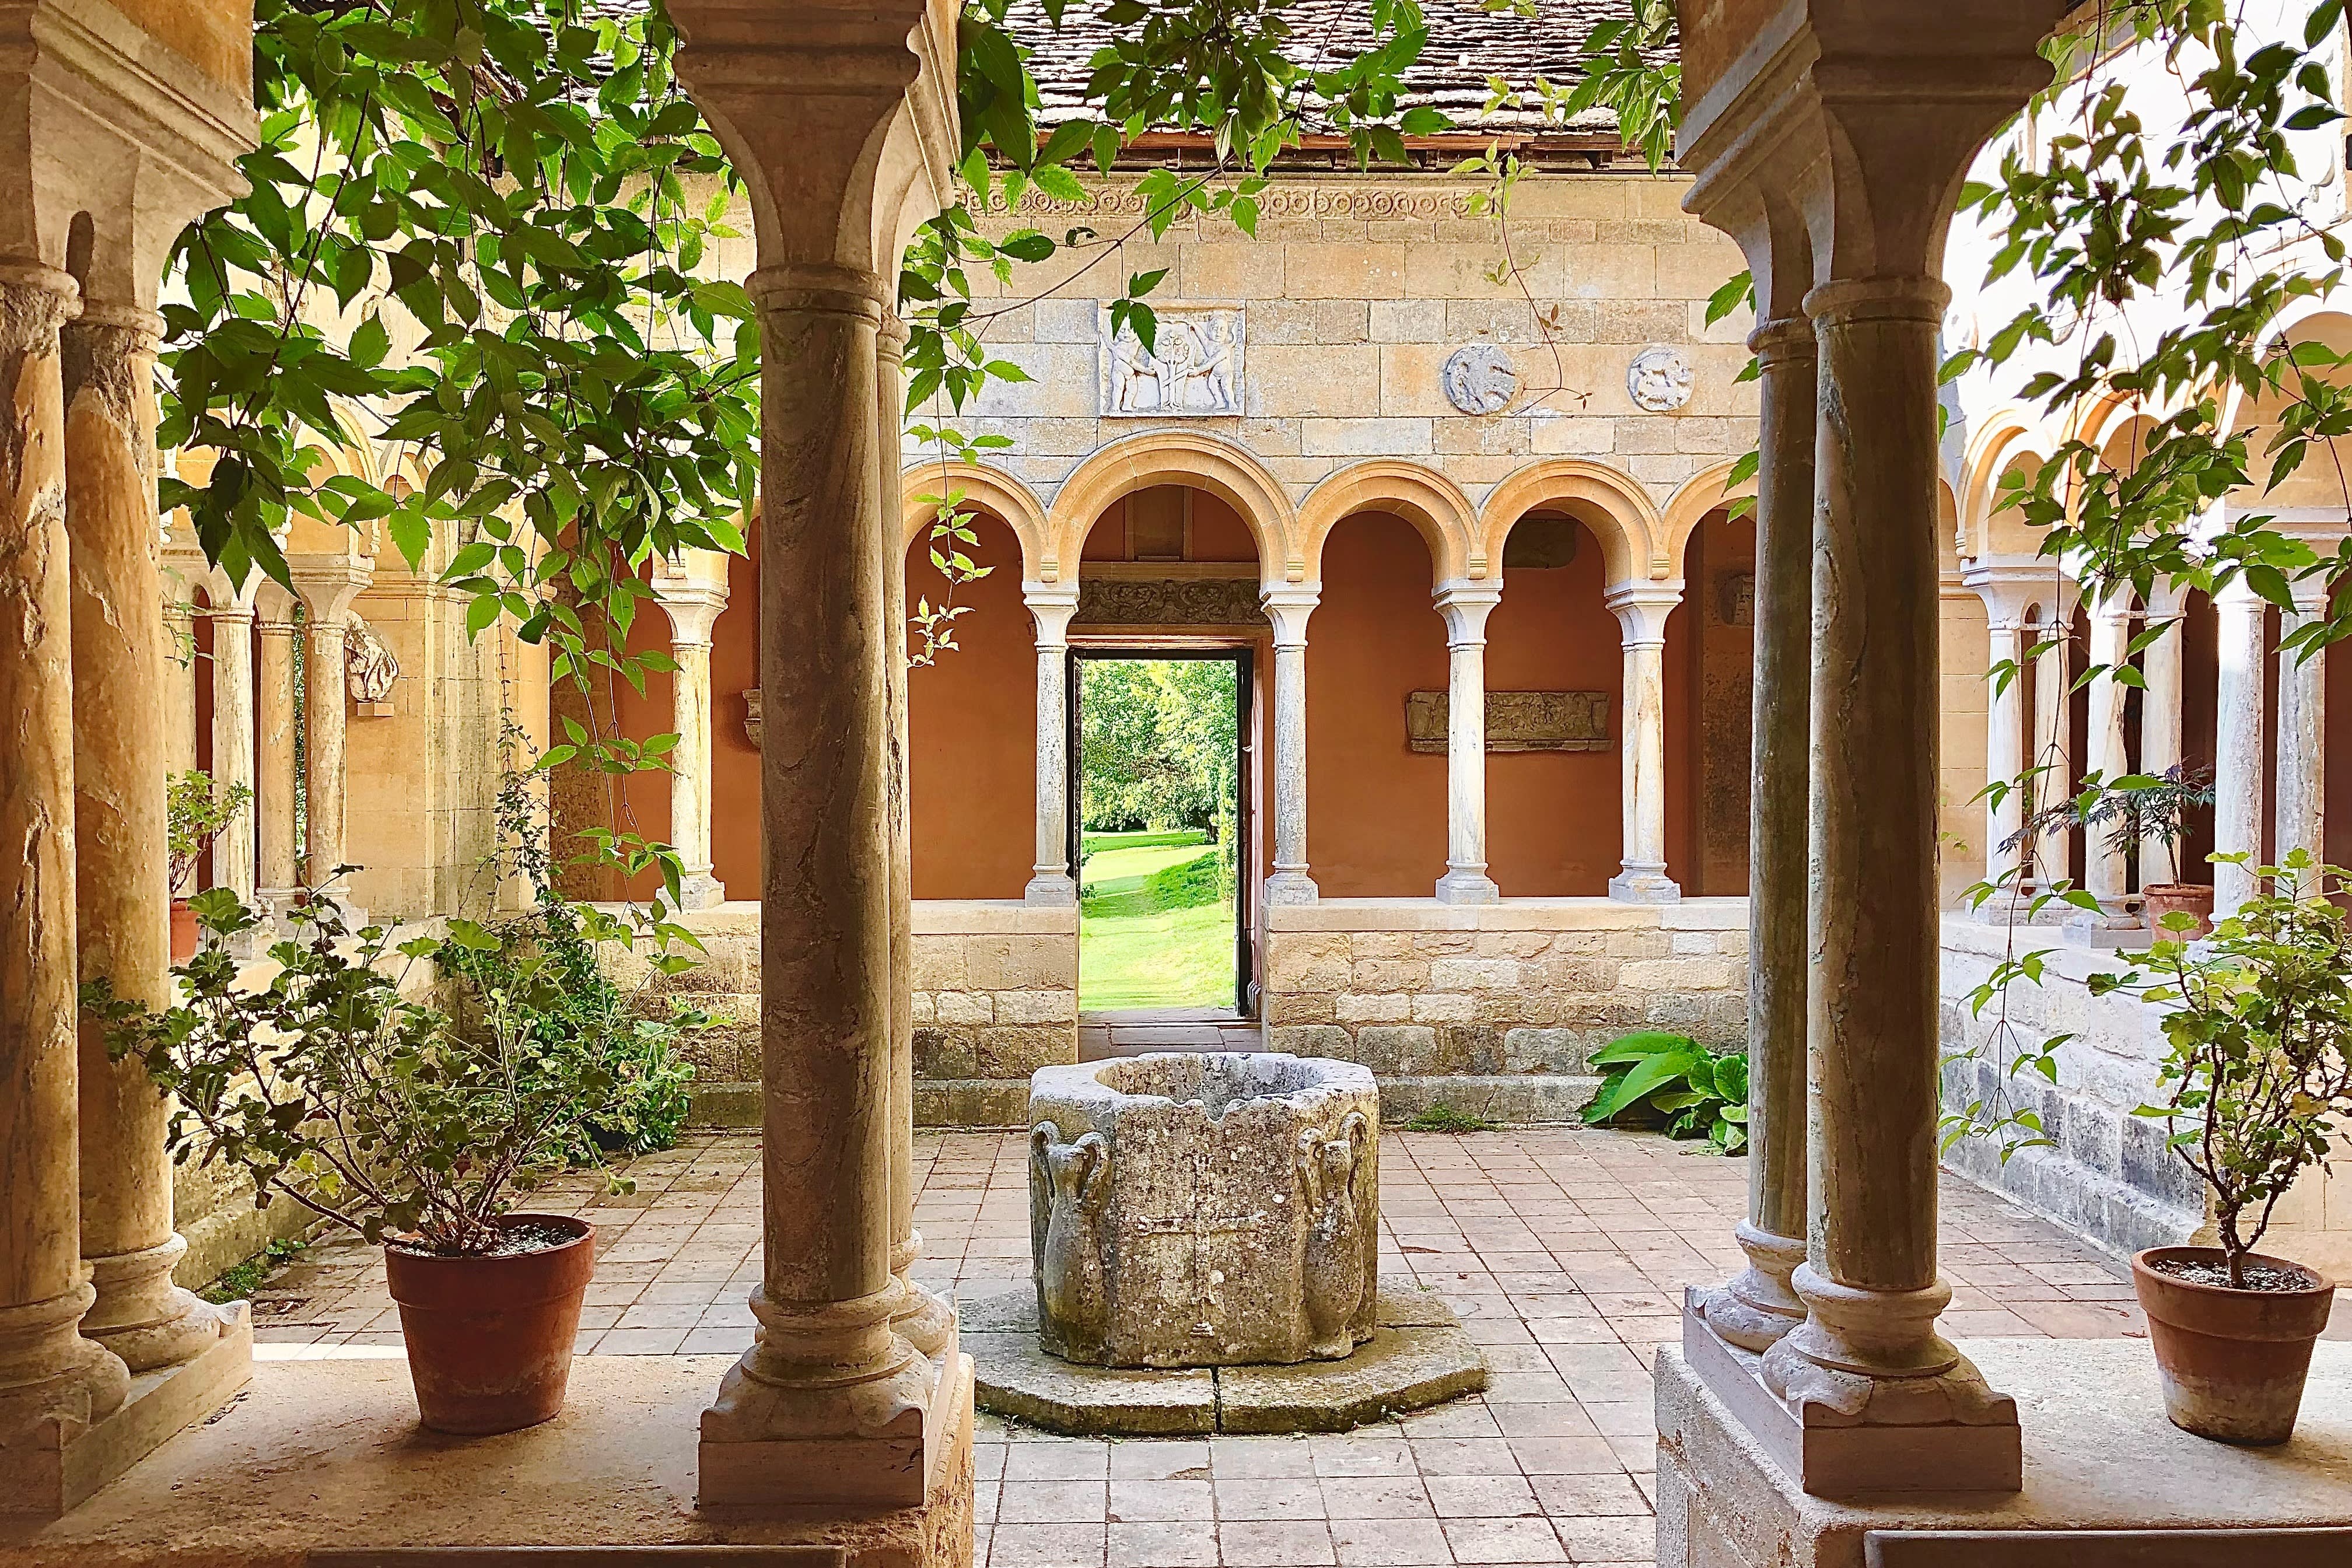 The loggia at Iford Manor in Wiltshire